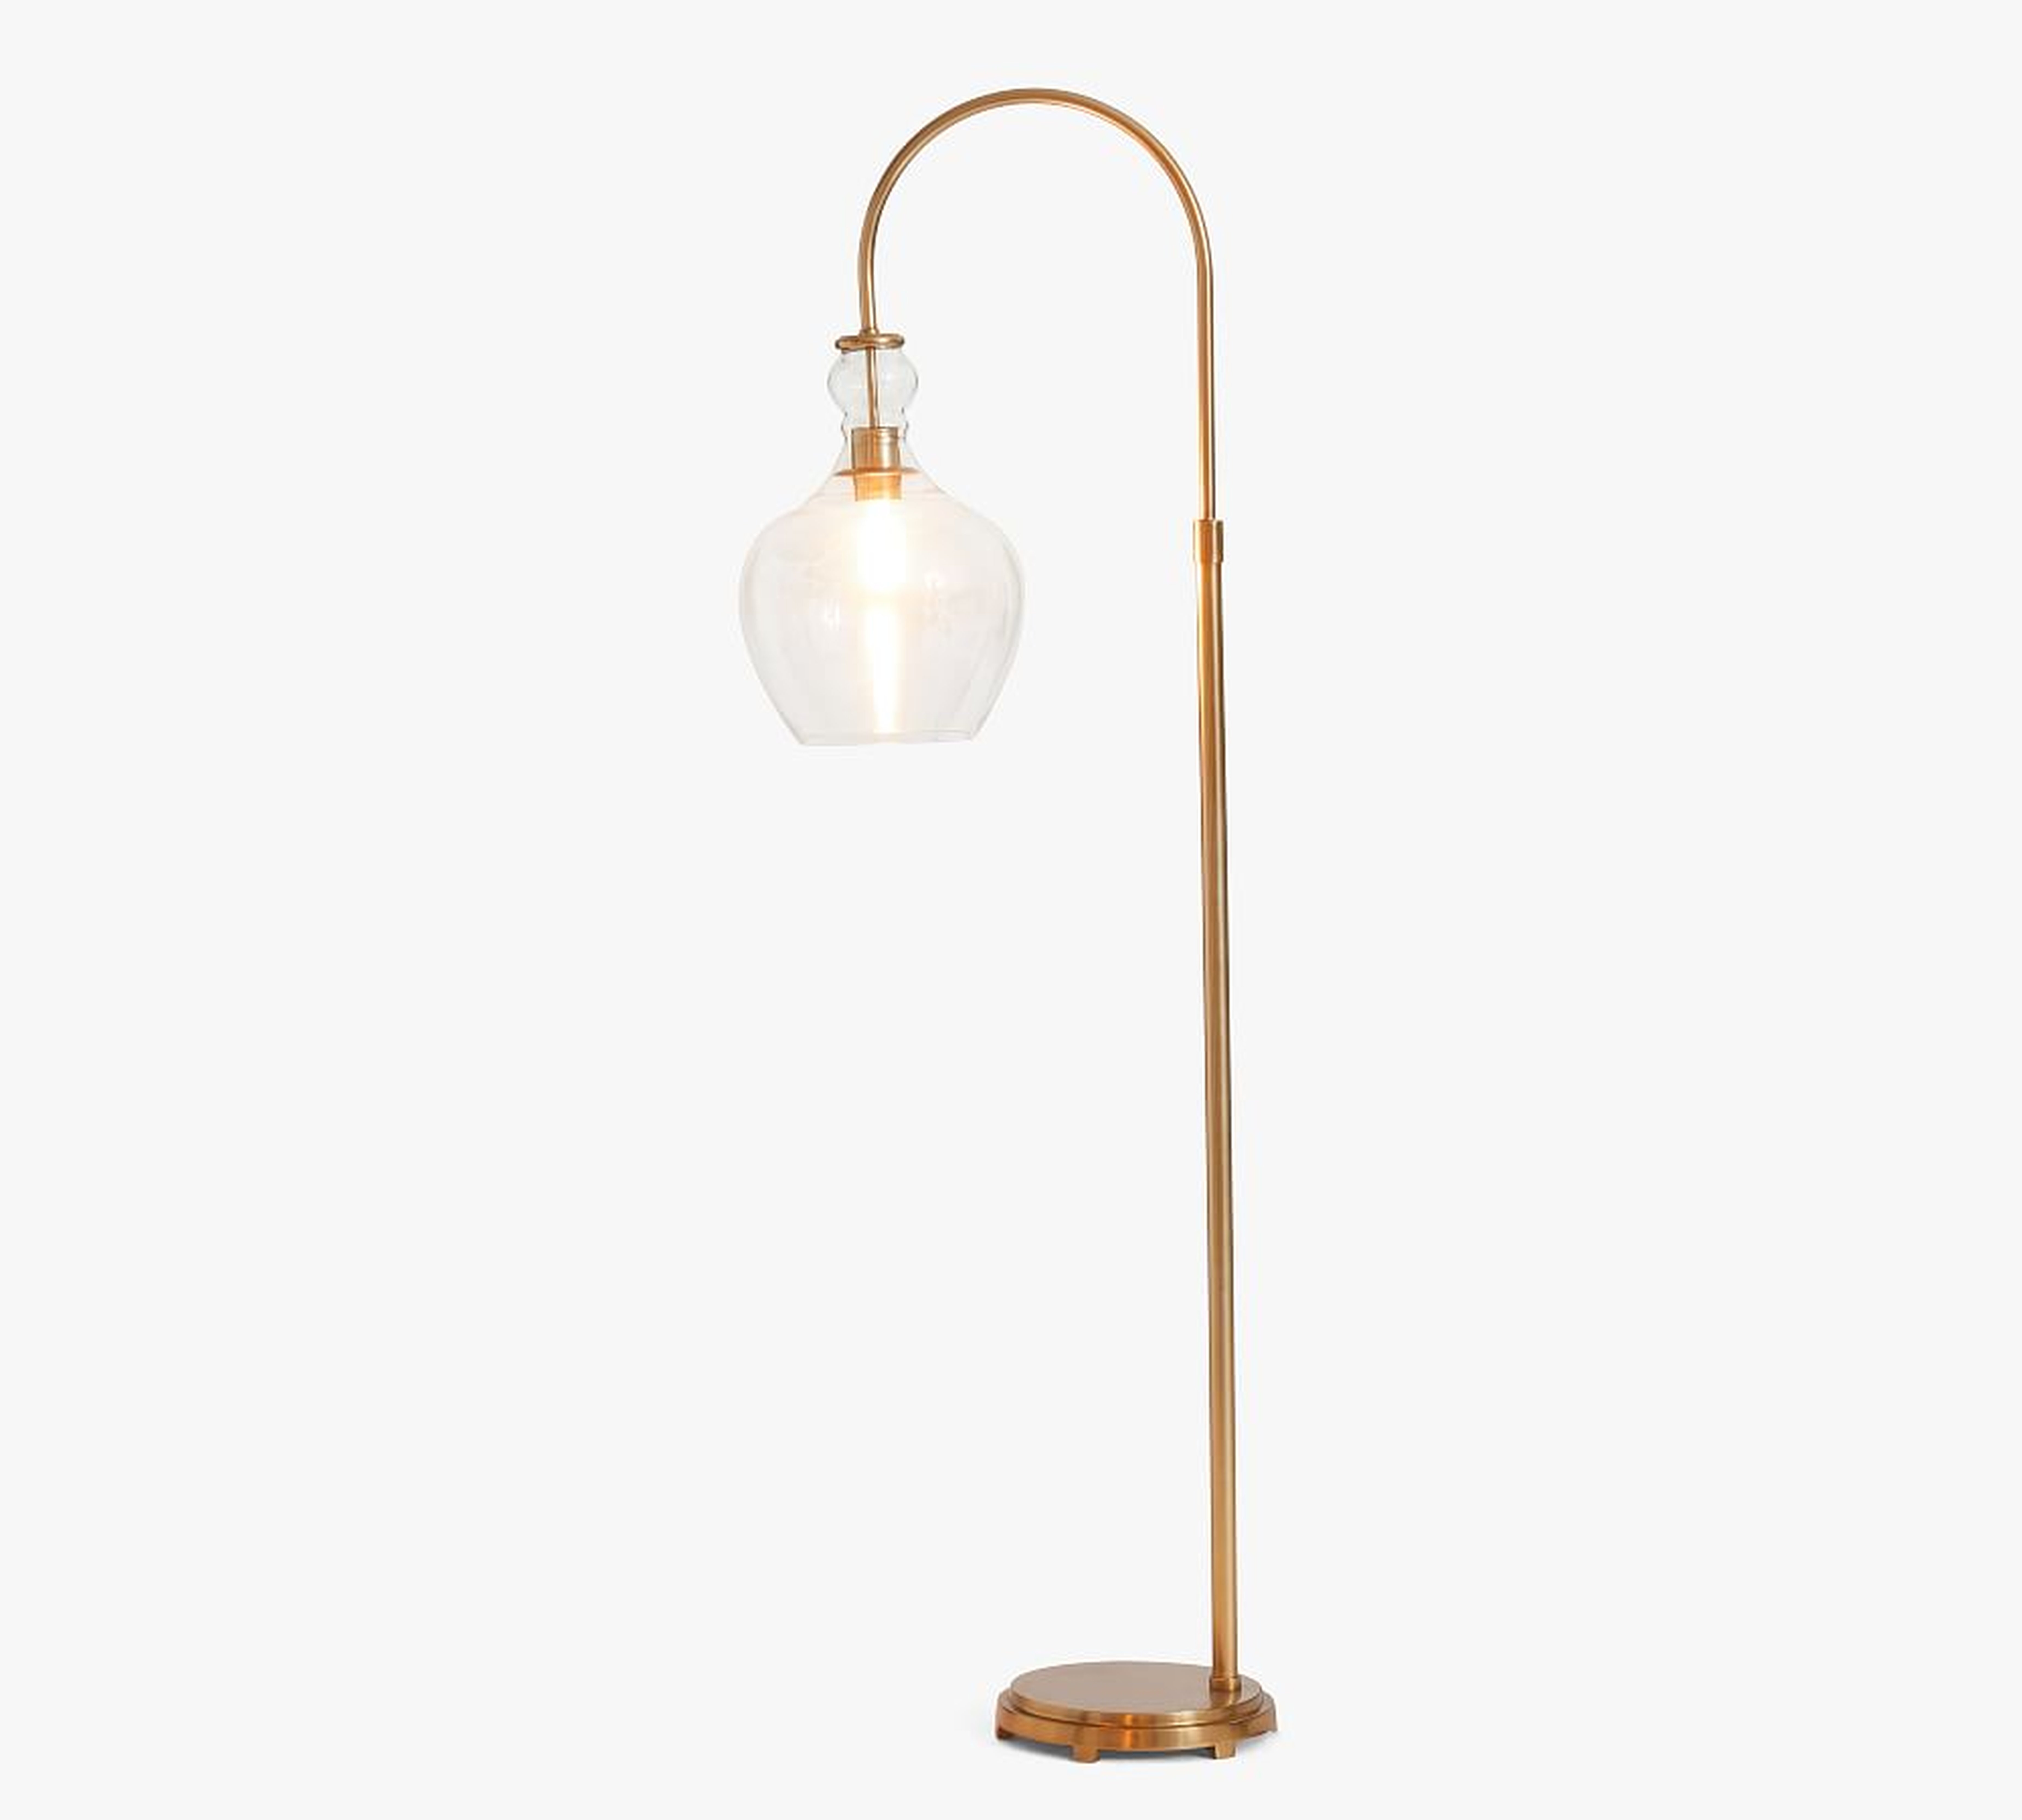 Flynn Recycled Glass Floor Lamp, Tumbled Brass - Pottery Barn